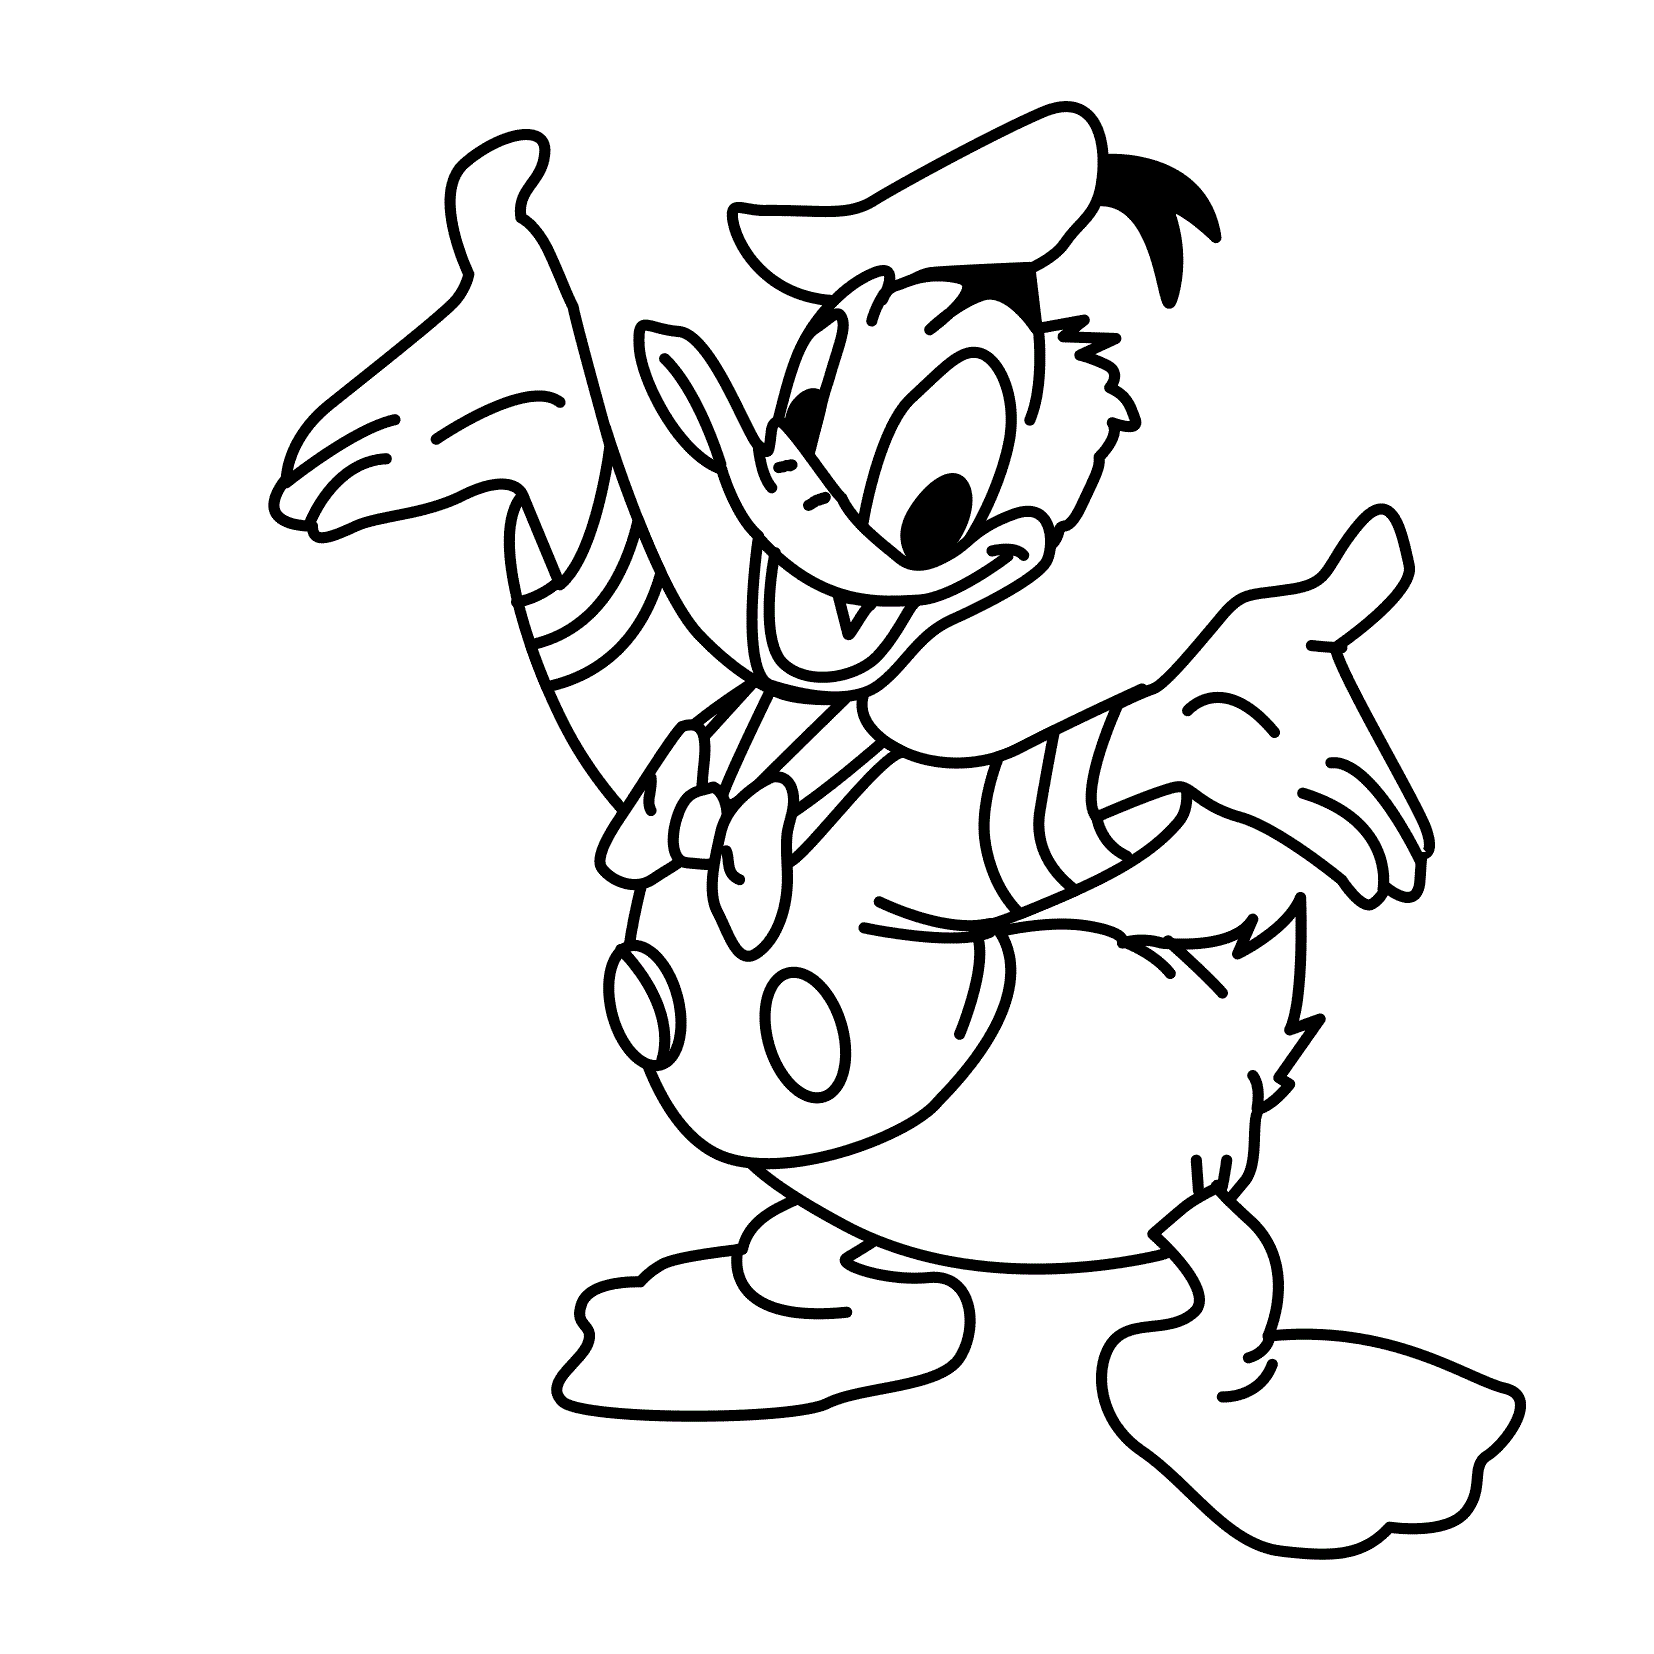 Donald Duck Coloring Sheets.